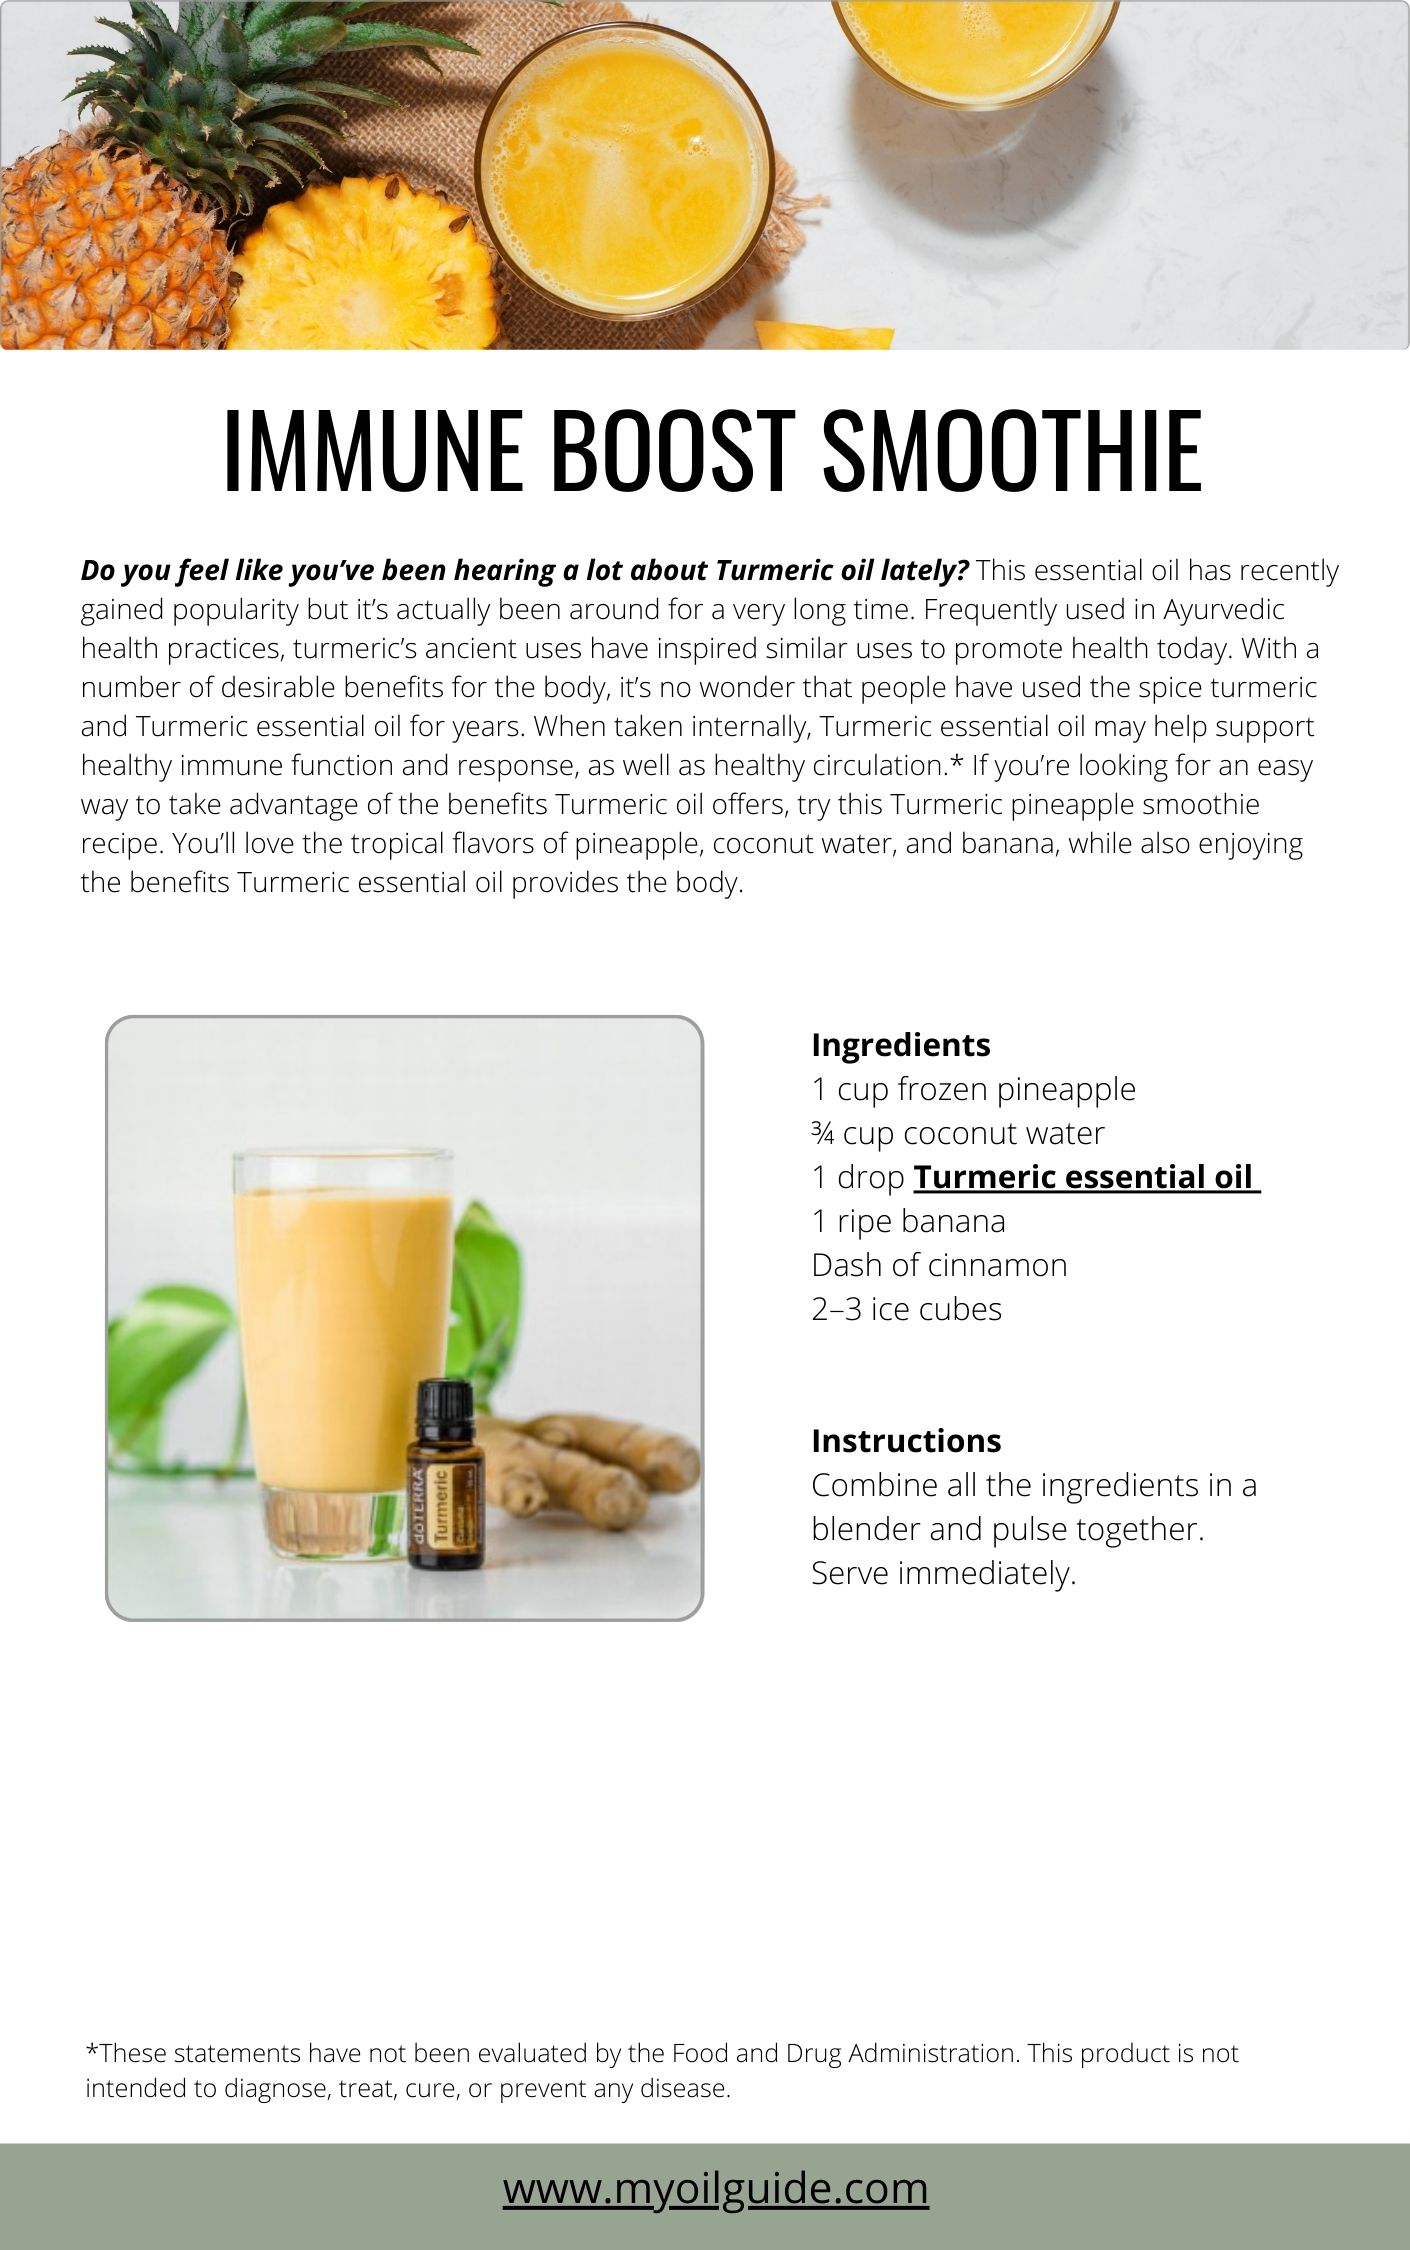 Immune support smoothie with pineapple and turmeric essential oil